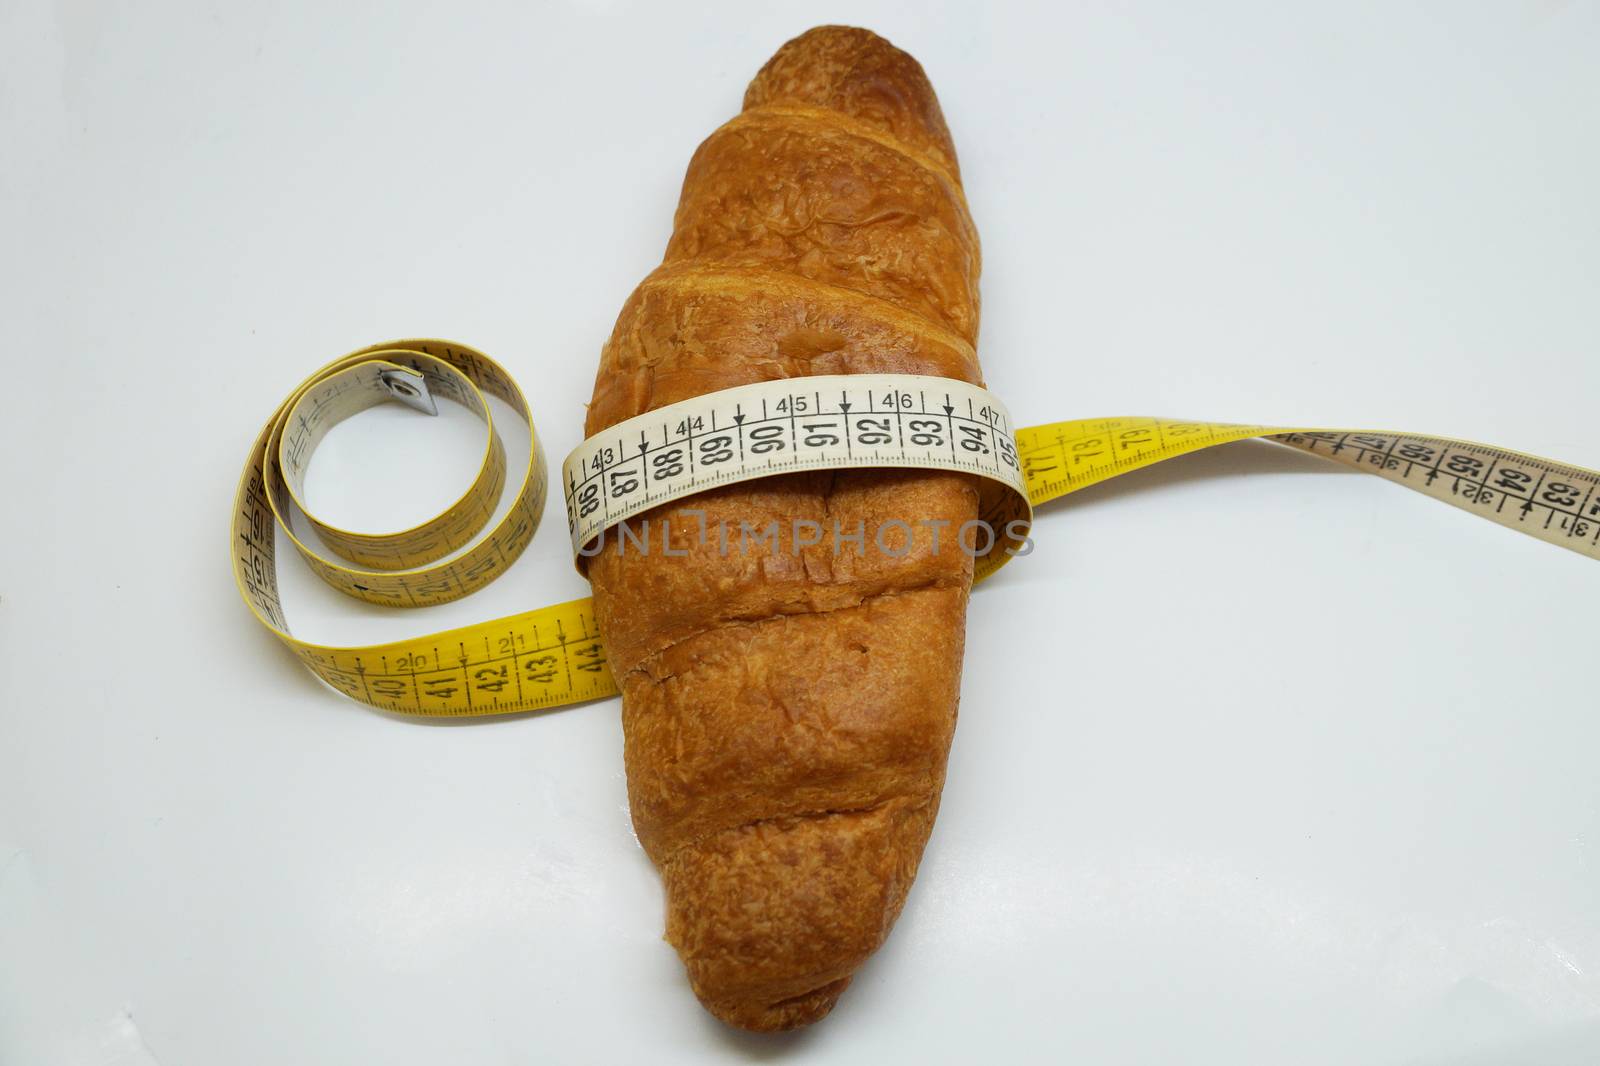 soft measuring ruler wrapped around a croissant as a symbol of unhealthy nutrition, on a white background